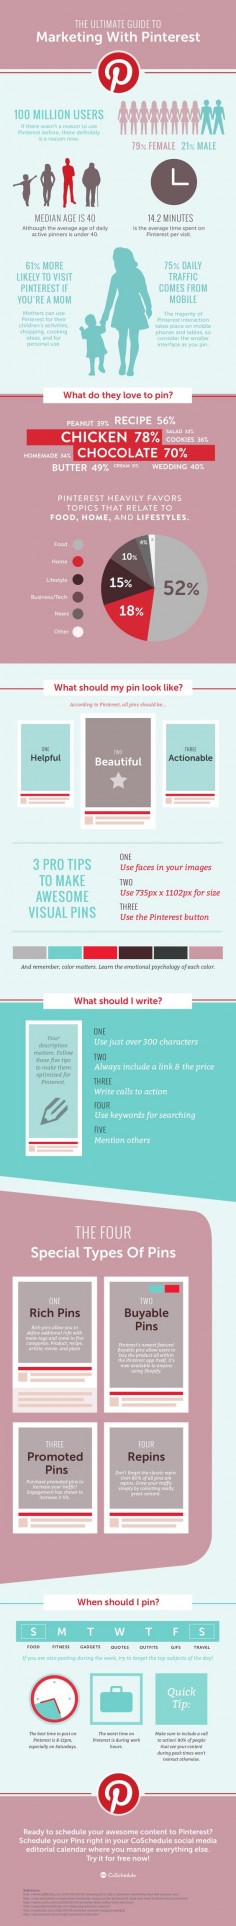 The Ultimate Guide On How To Use Pinterest For Marketing - infographic